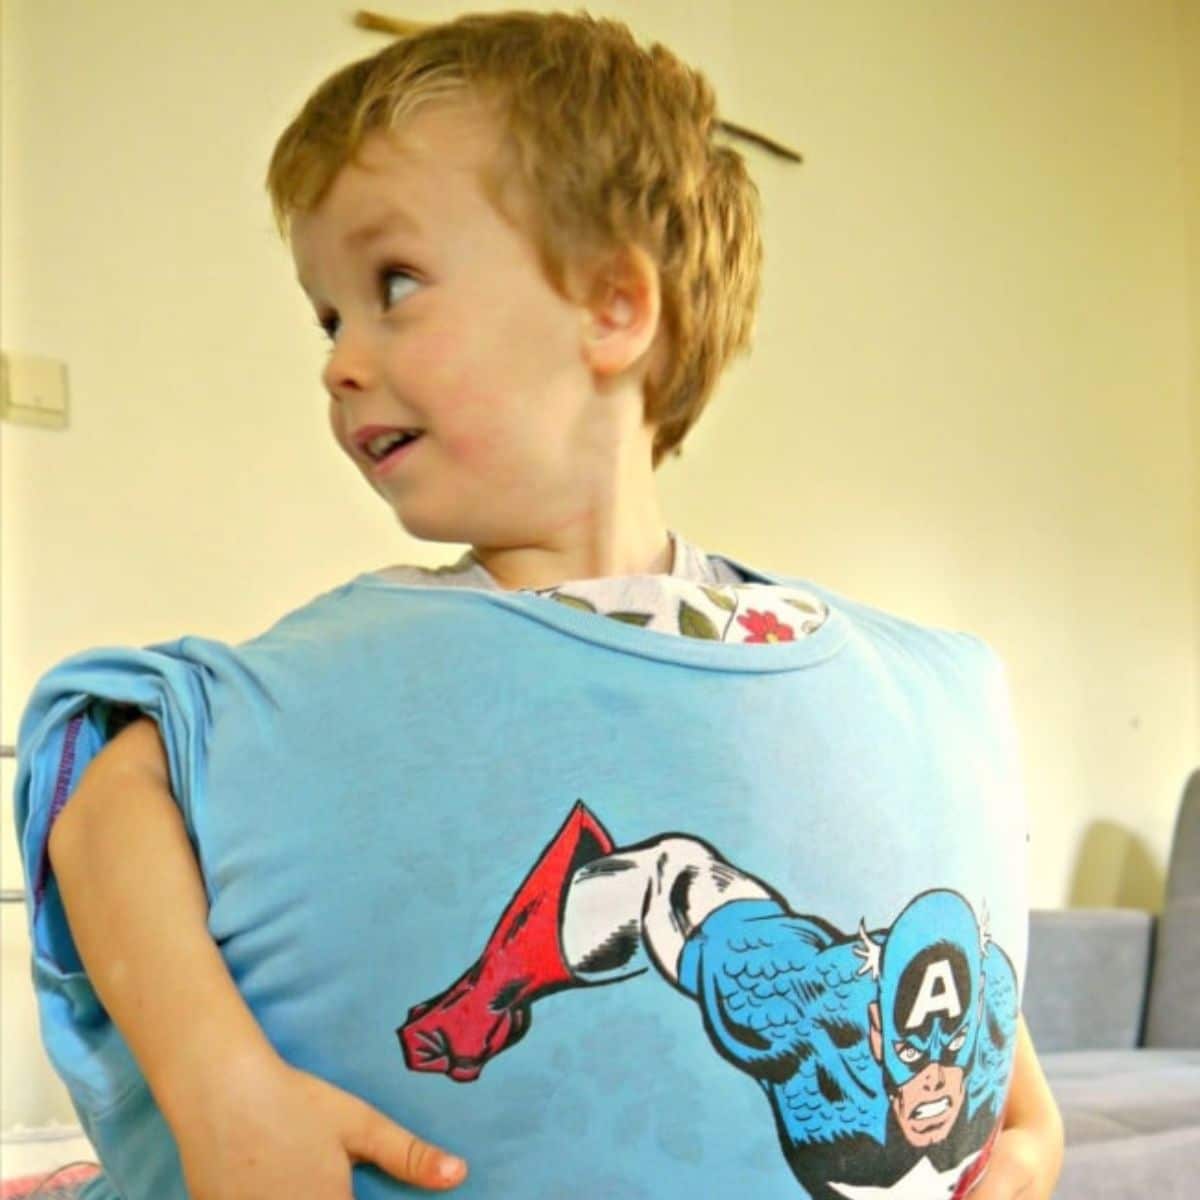 Kid wearing a pillow and playing a pillow wrestling.